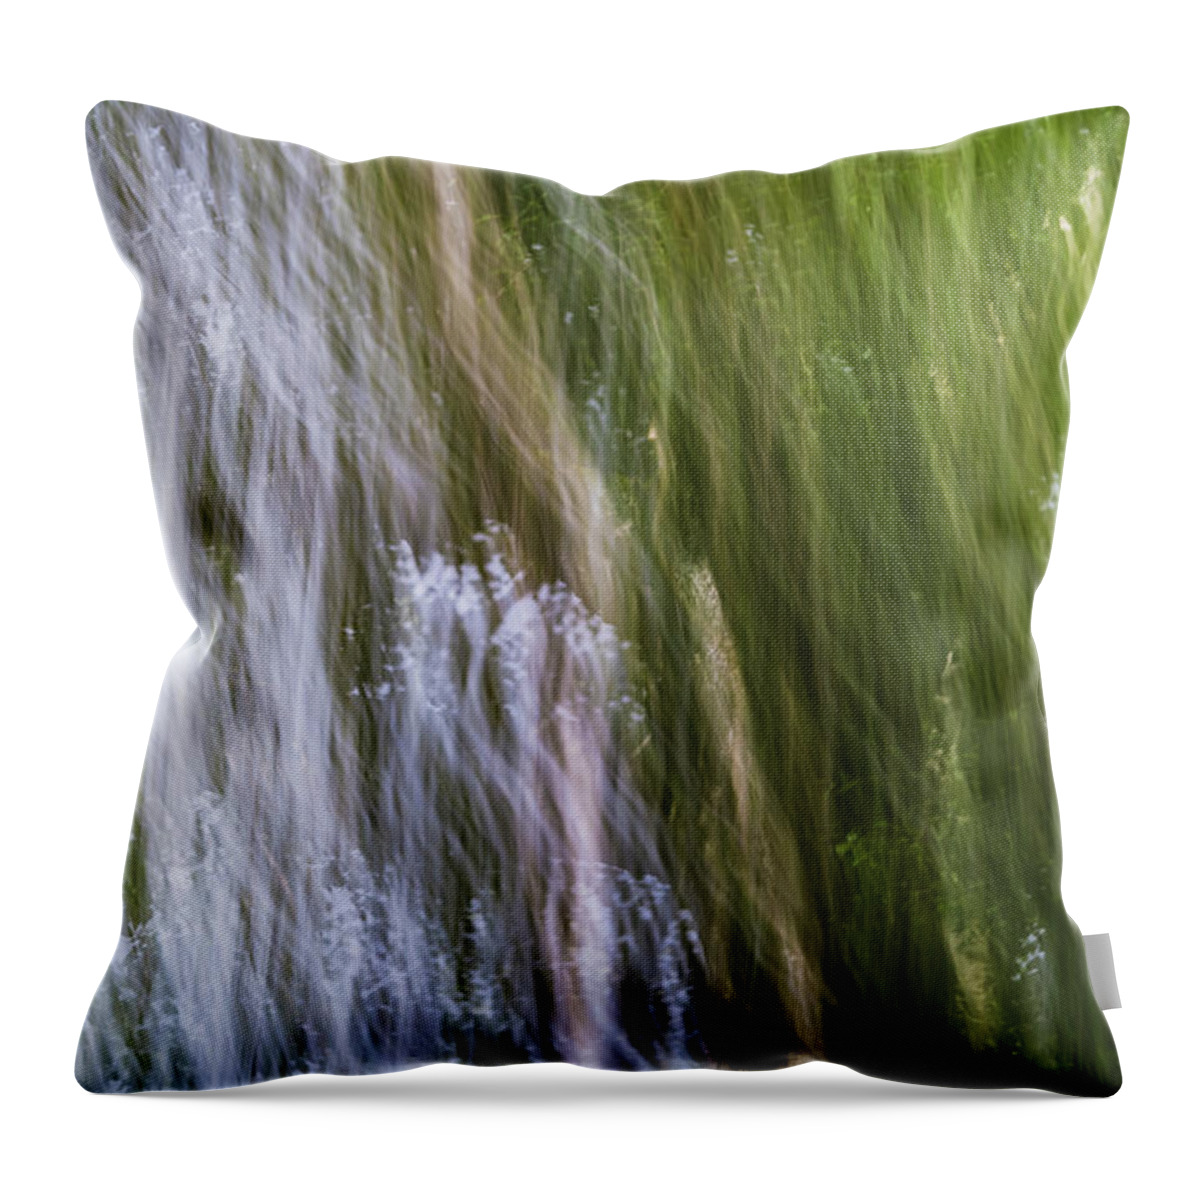 Icm Throw Pillow featuring the photograph Bursting Out by Ada Weyland